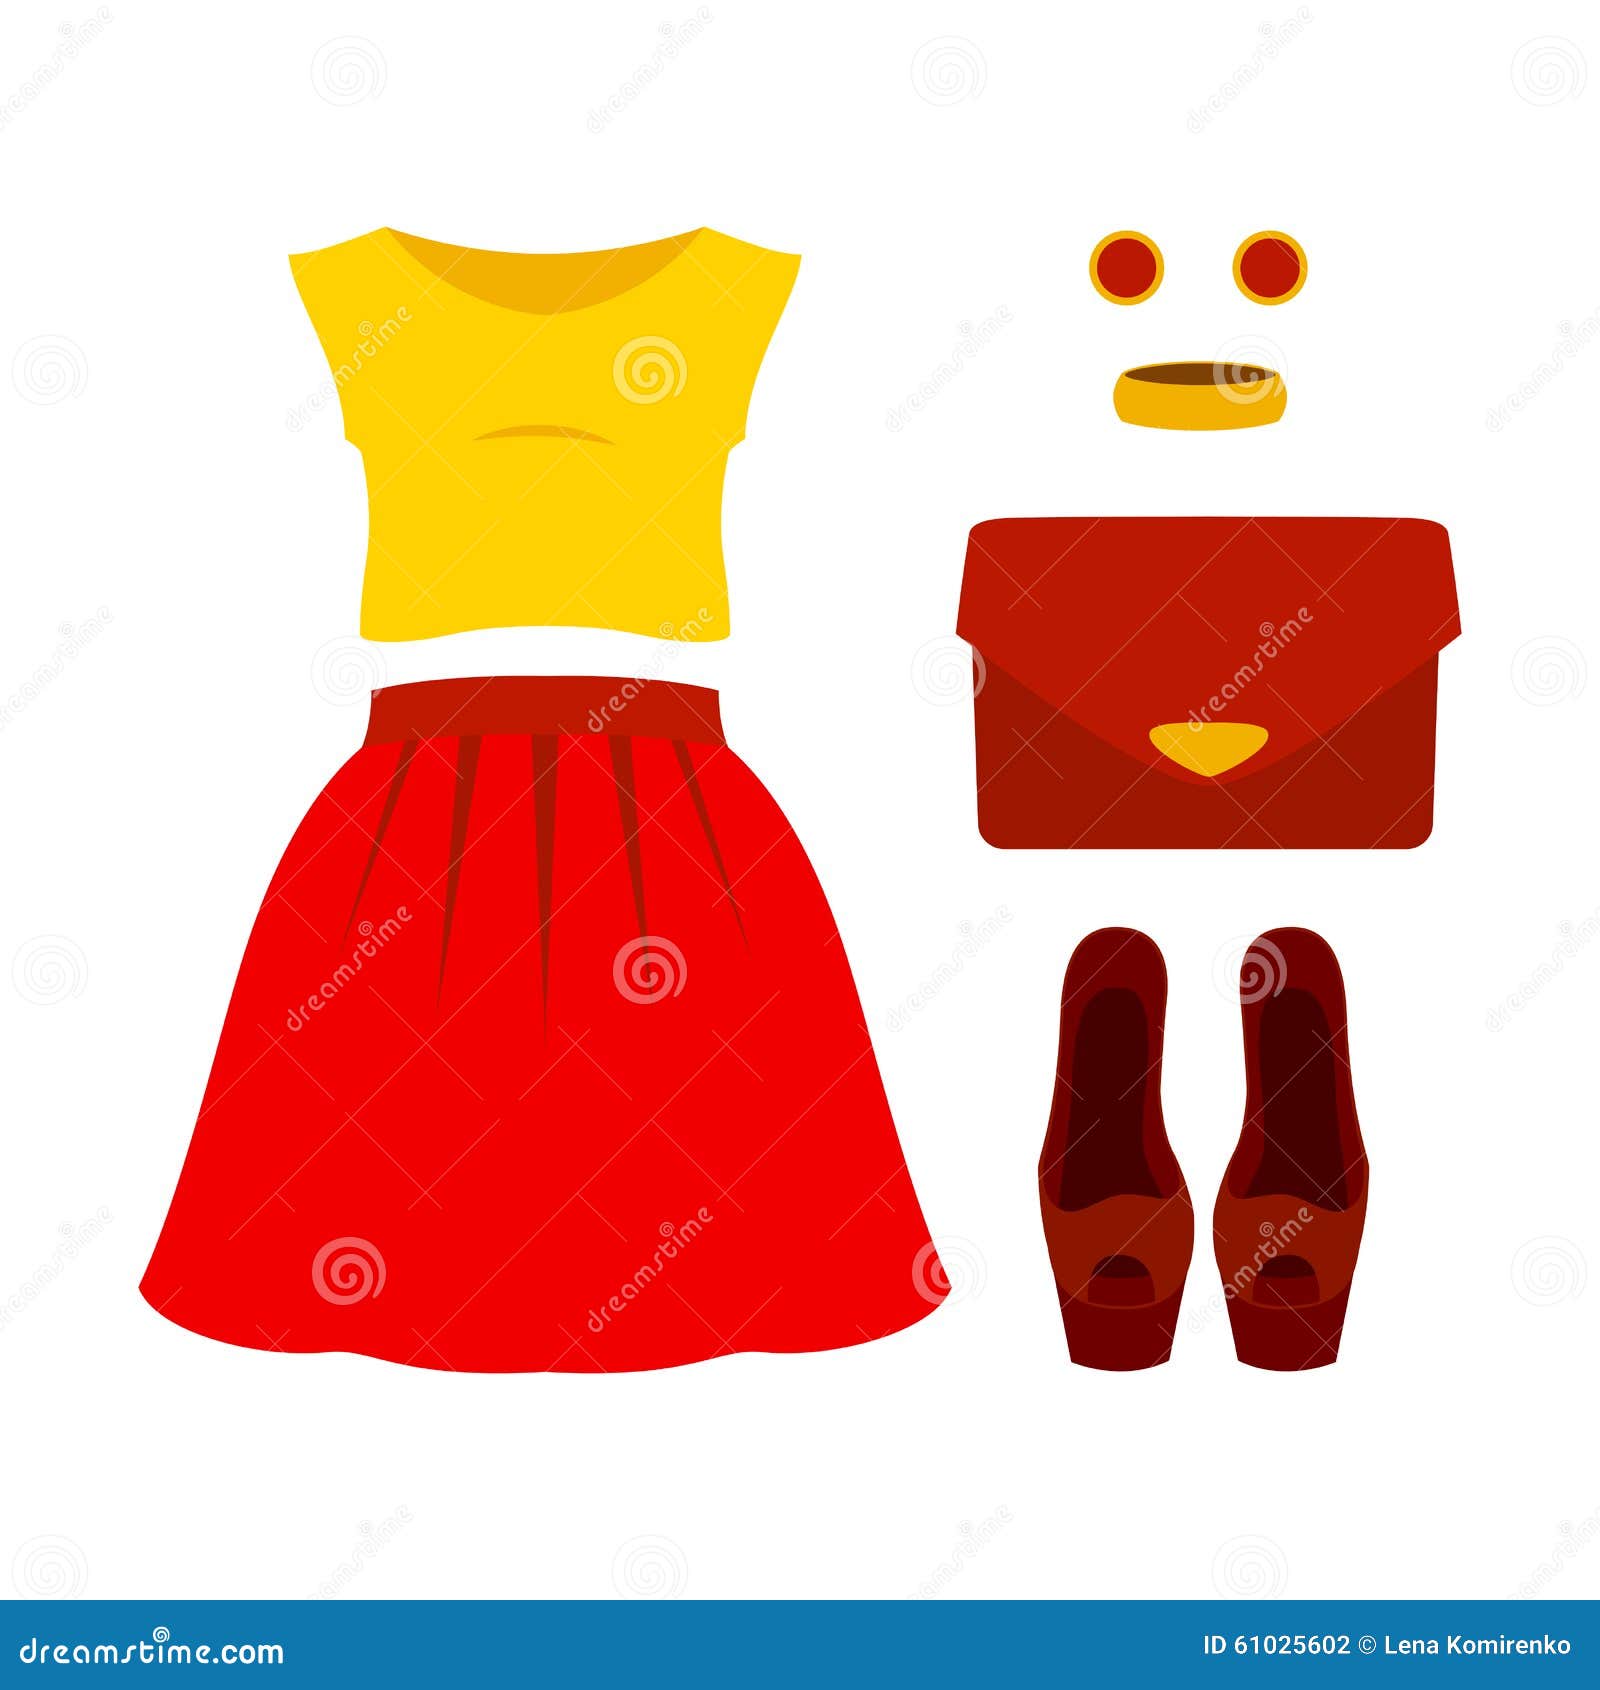 set of trendy women's clothes with red skirt, yellow top and acc